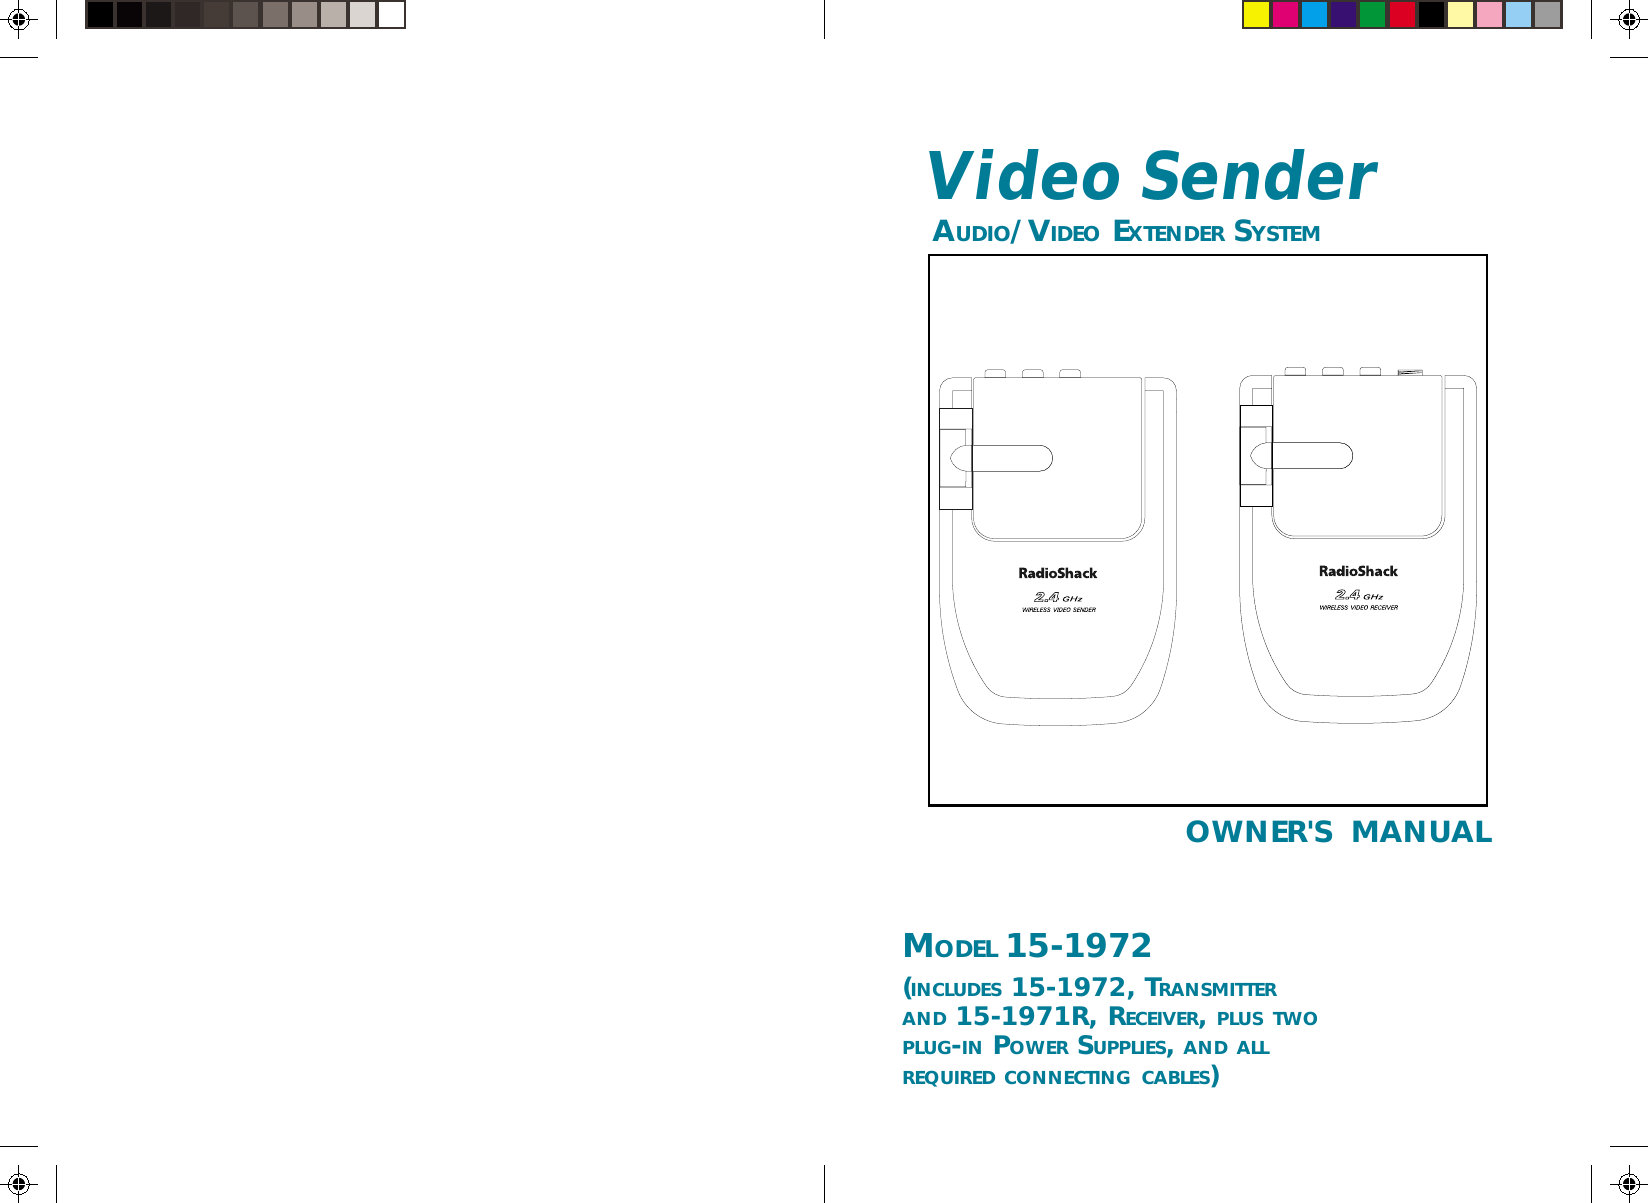 OWNER&apos;S  MANUALVideo Sender AUDIO/VIDEO EXTENDER SYSTEMMODEL 15-1972(INCLUDES 15-1972, TRANSMITTERAND 15-1971R, RECEIVER, PLUS TWOPLUG-IN POWER SUPPLIES, AND ALLREQUIRED CONNECTING CABLES)